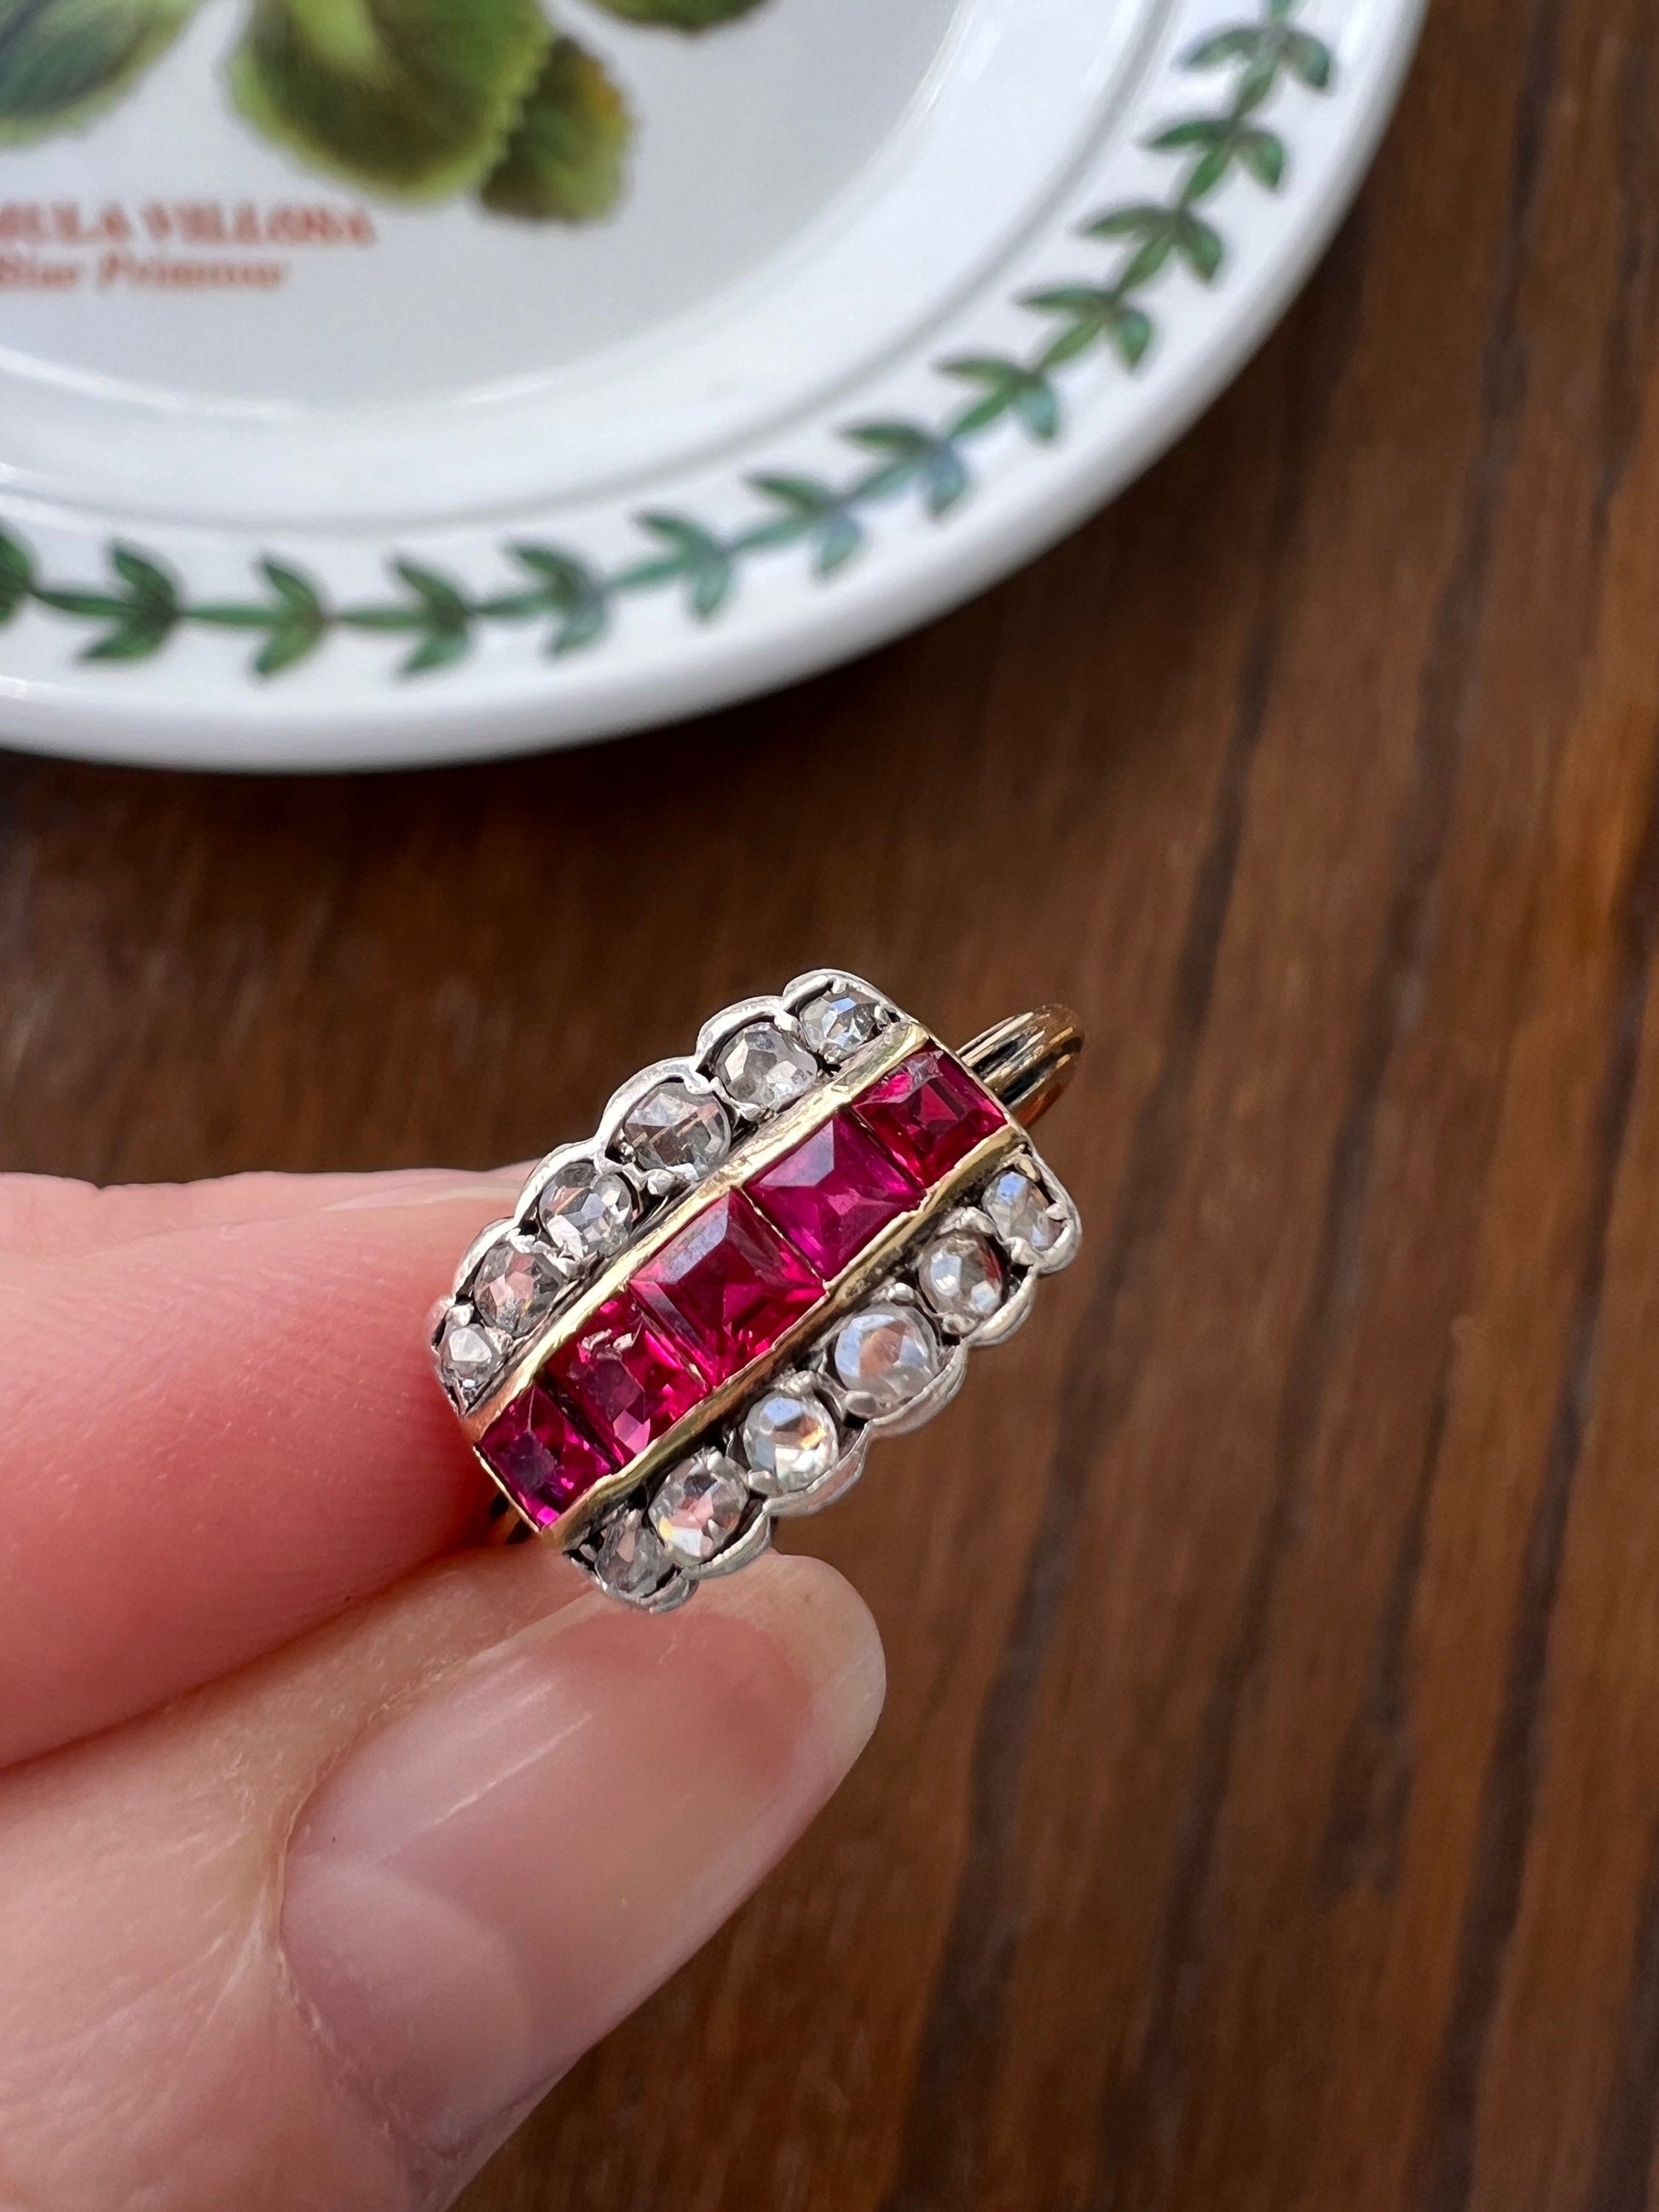 LINEAR Grid RUBY Rose Cut Diamond PINK Stacker Ring French ANTiQUE 18k Gold Square Carre Stacker Romantic Gift Elegant Geometric Chunky